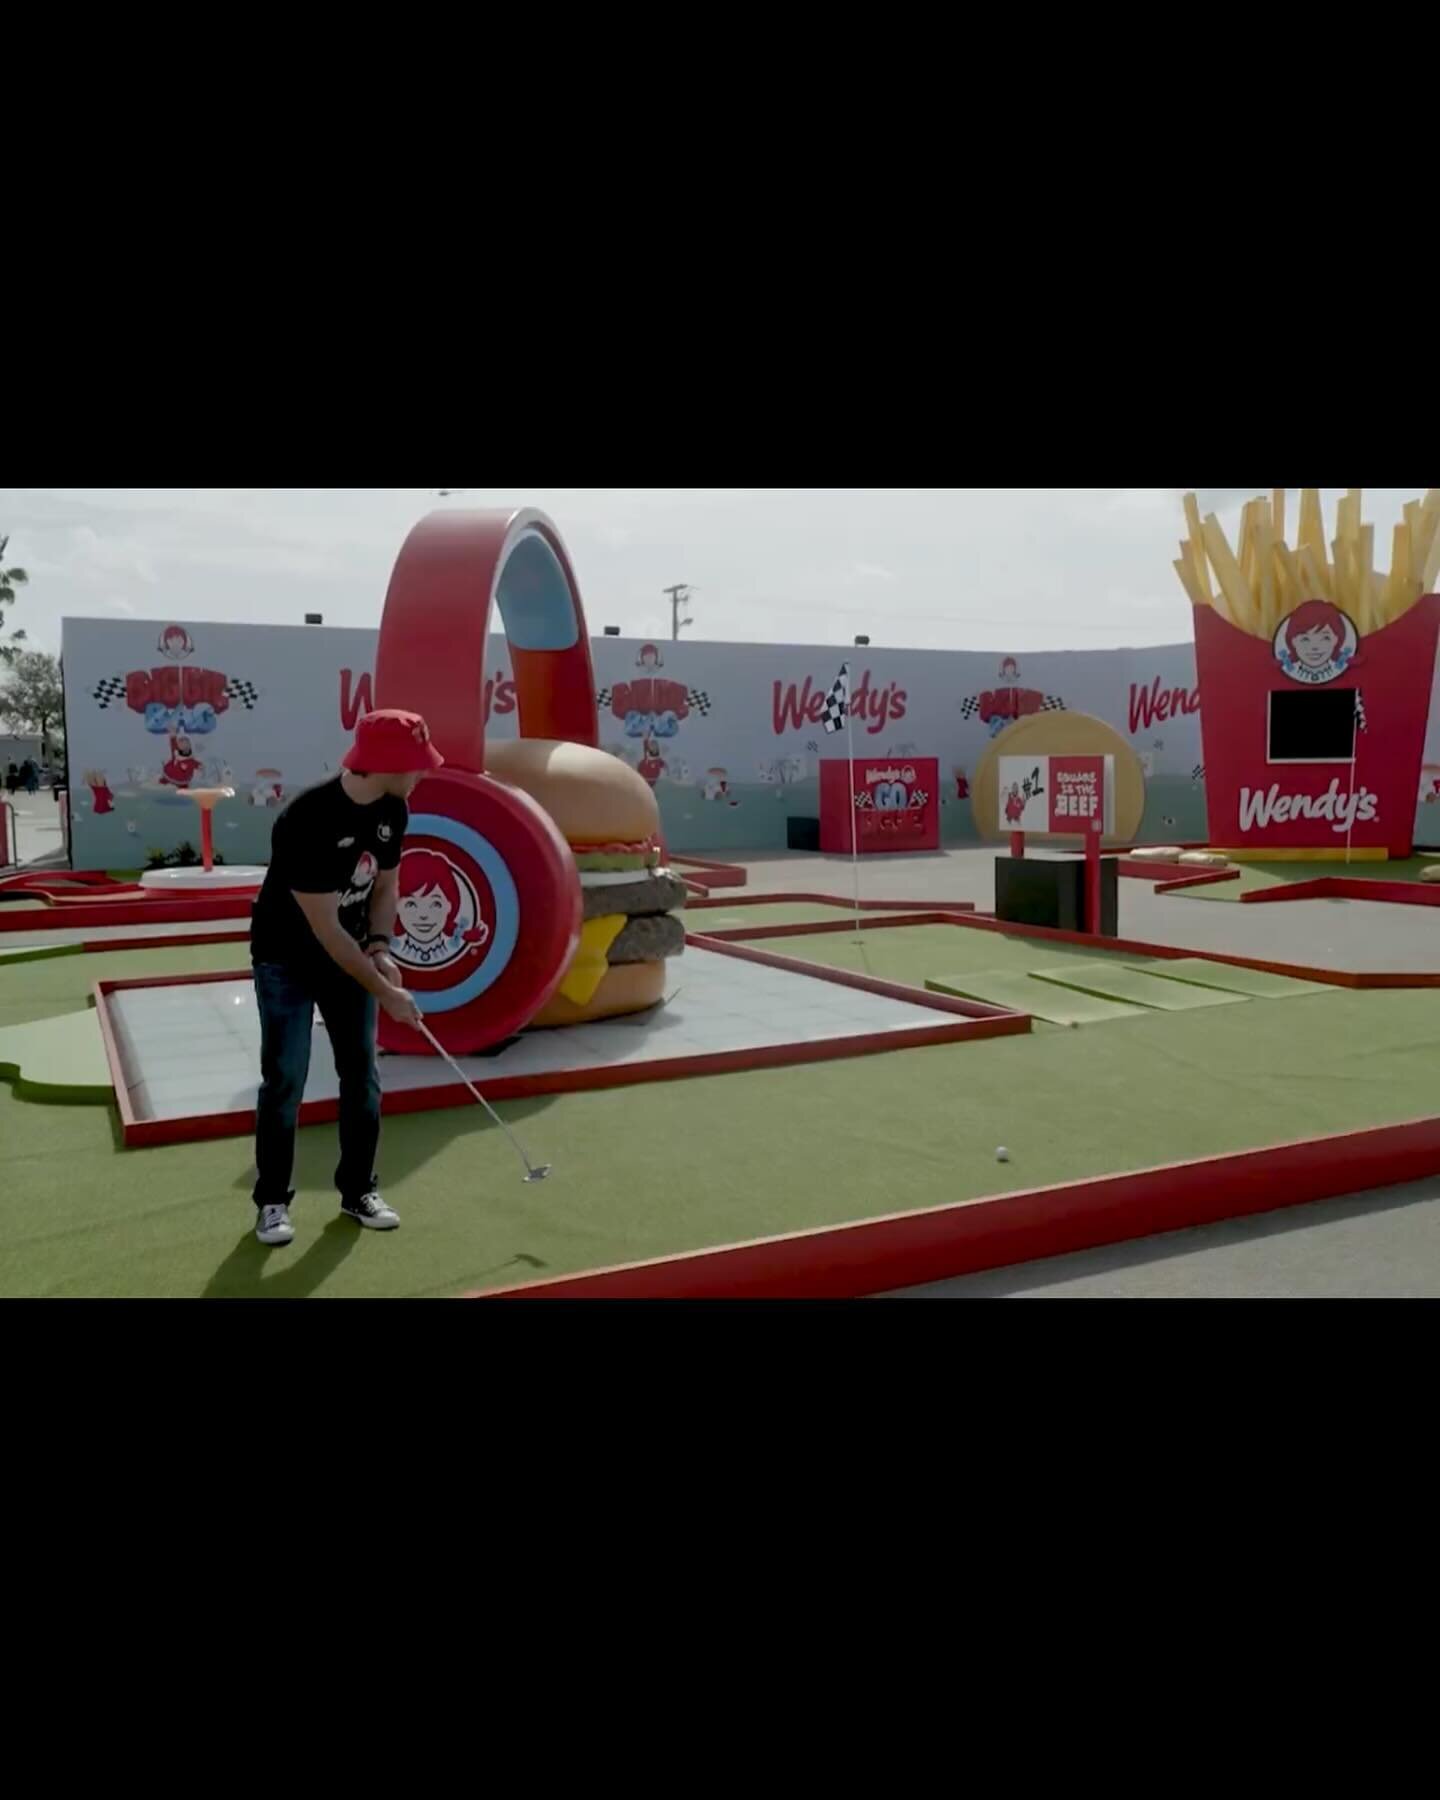 Wendy&rsquo;s is creatively activating in a BIG way around the Daytona 500 with a really cool Wendy&rsquo;s Go Biggie Golf Invitational course where they&rsquo;re having NASCAR drivers and fans compete in a fun round of miniature golf for a chance to